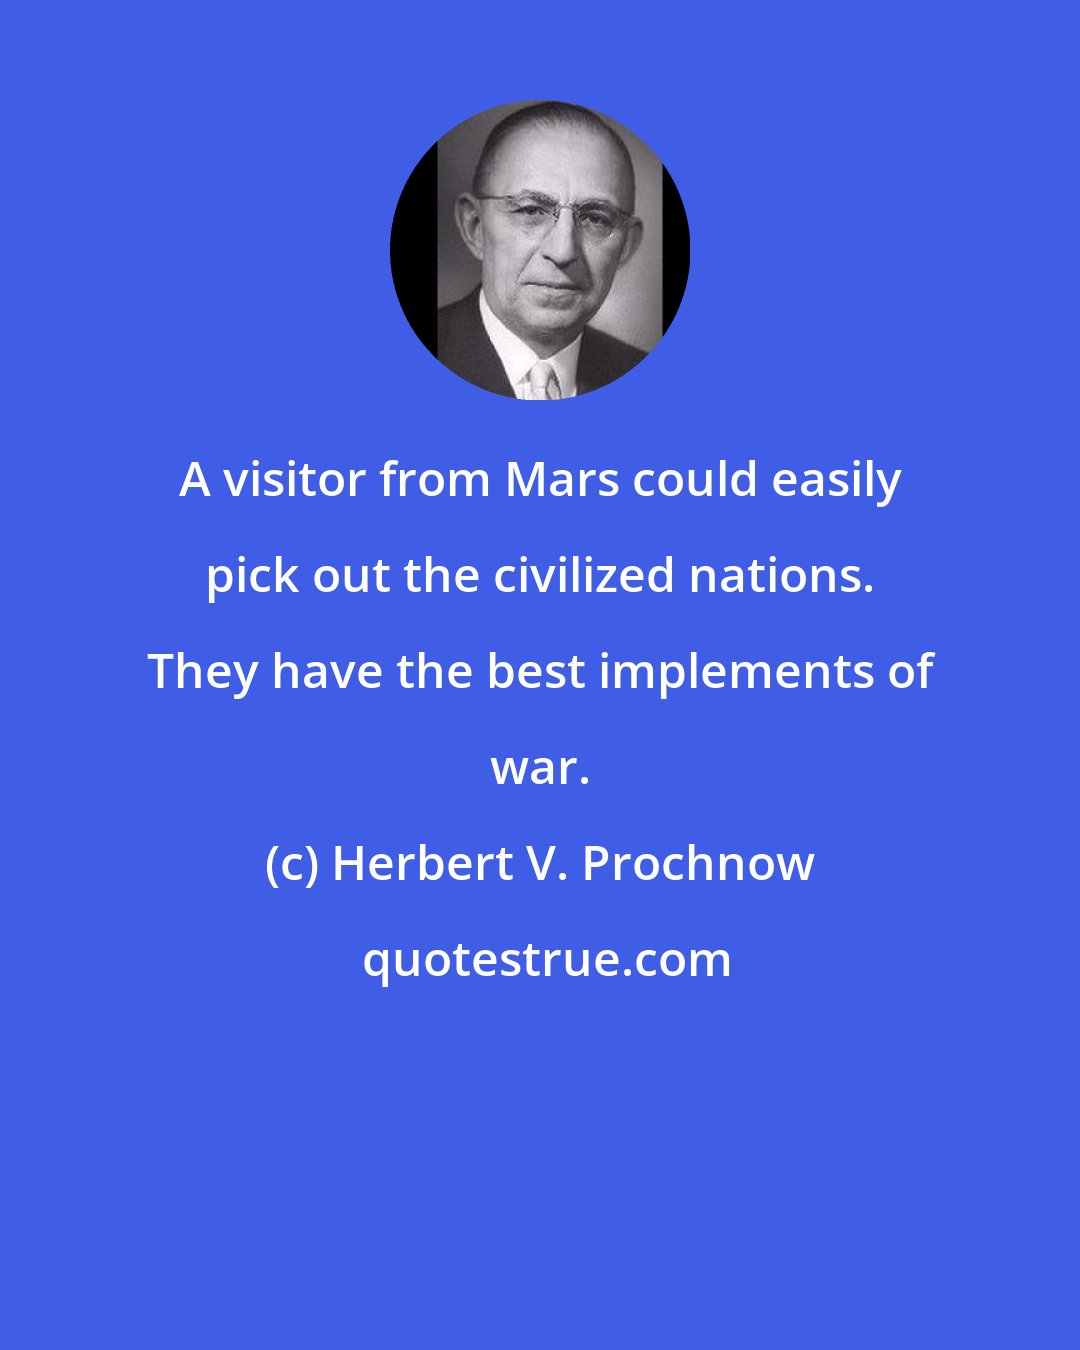 Herbert V. Prochnow: A visitor from Mars could easily pick out the civilized nations. They have the best implements of war.